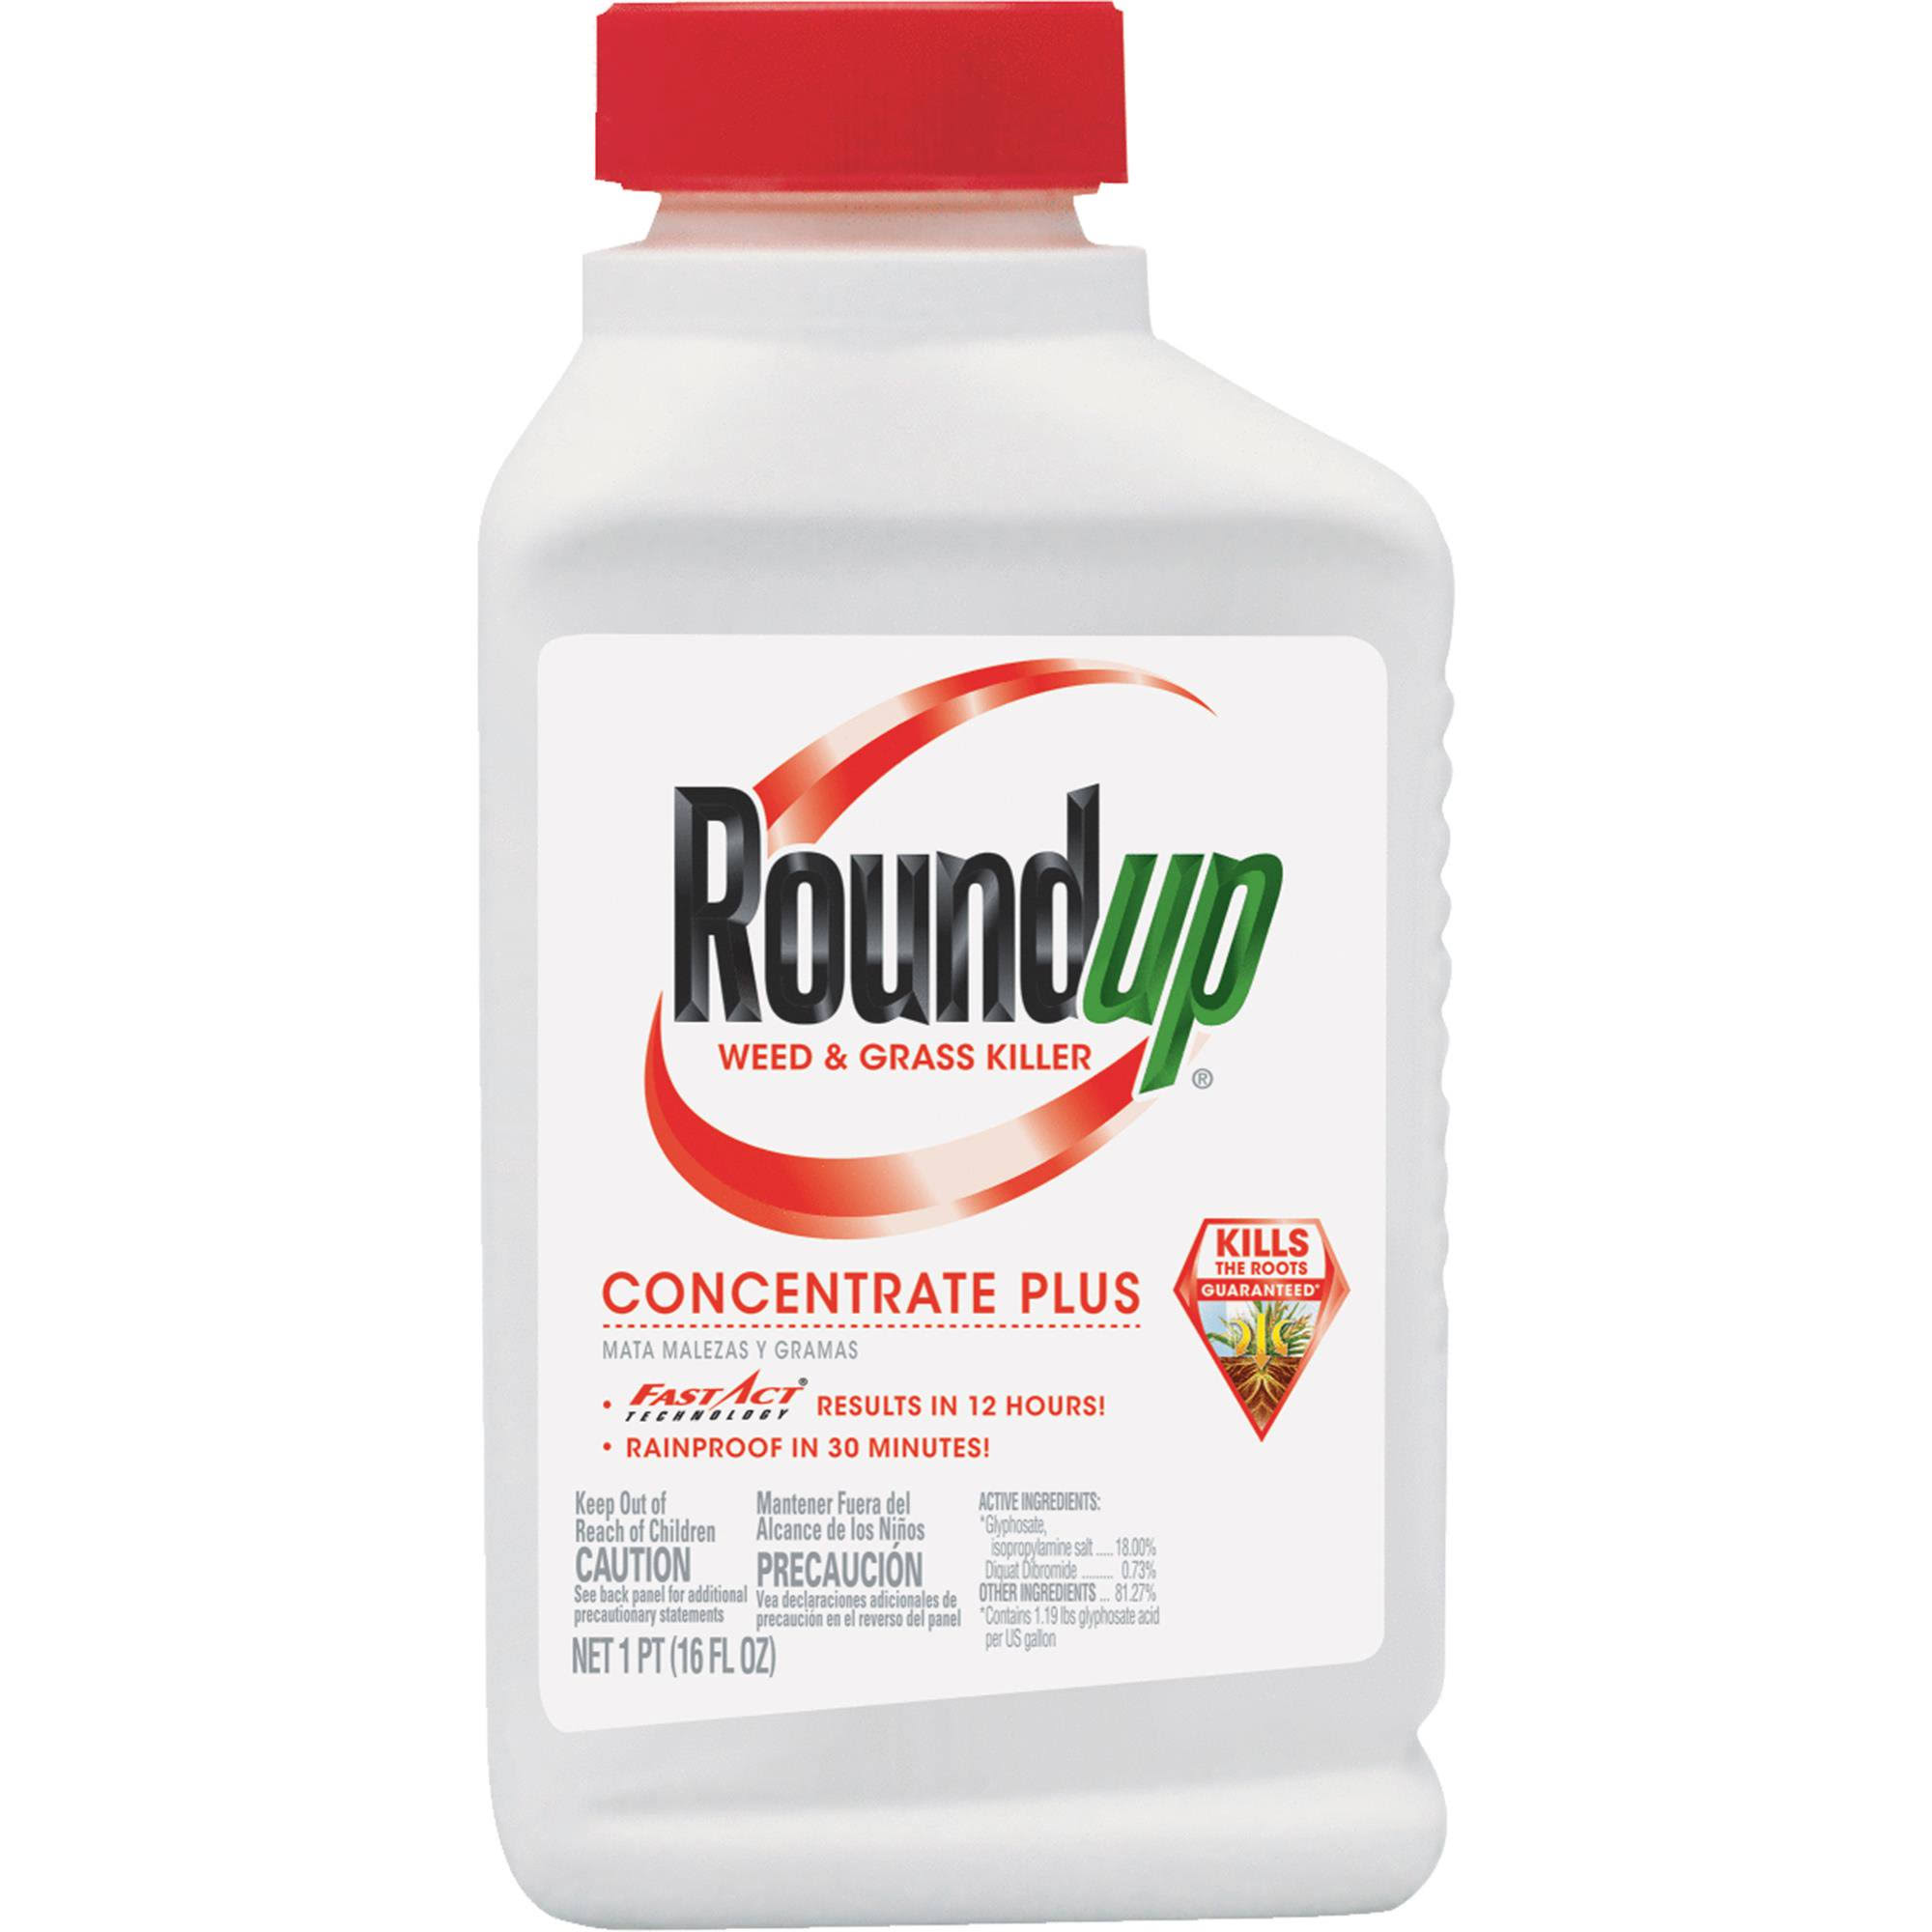 Roundup Concentrate Plus Weed and Grass Killer